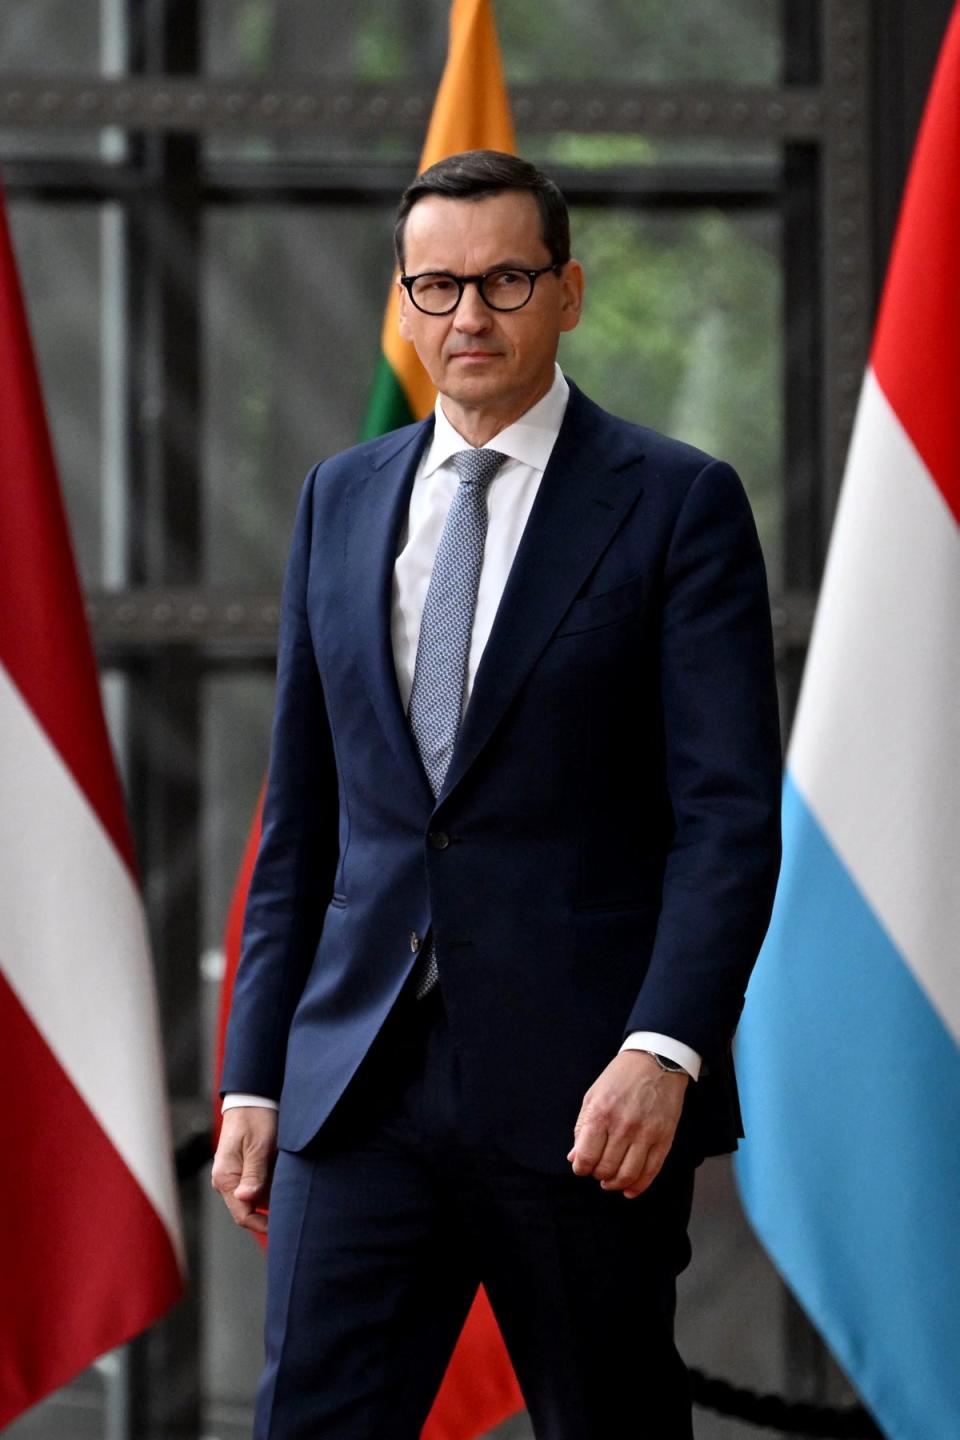 Poland's Prime Minister Mateusz Morawiecki arrives for the plenary session of a summit of the European Union and the Community of Latin American and Caribbean States (EU-CELAC) at The European Council Building in Brussels on July 18, 2023. (AFP via Getty Images)